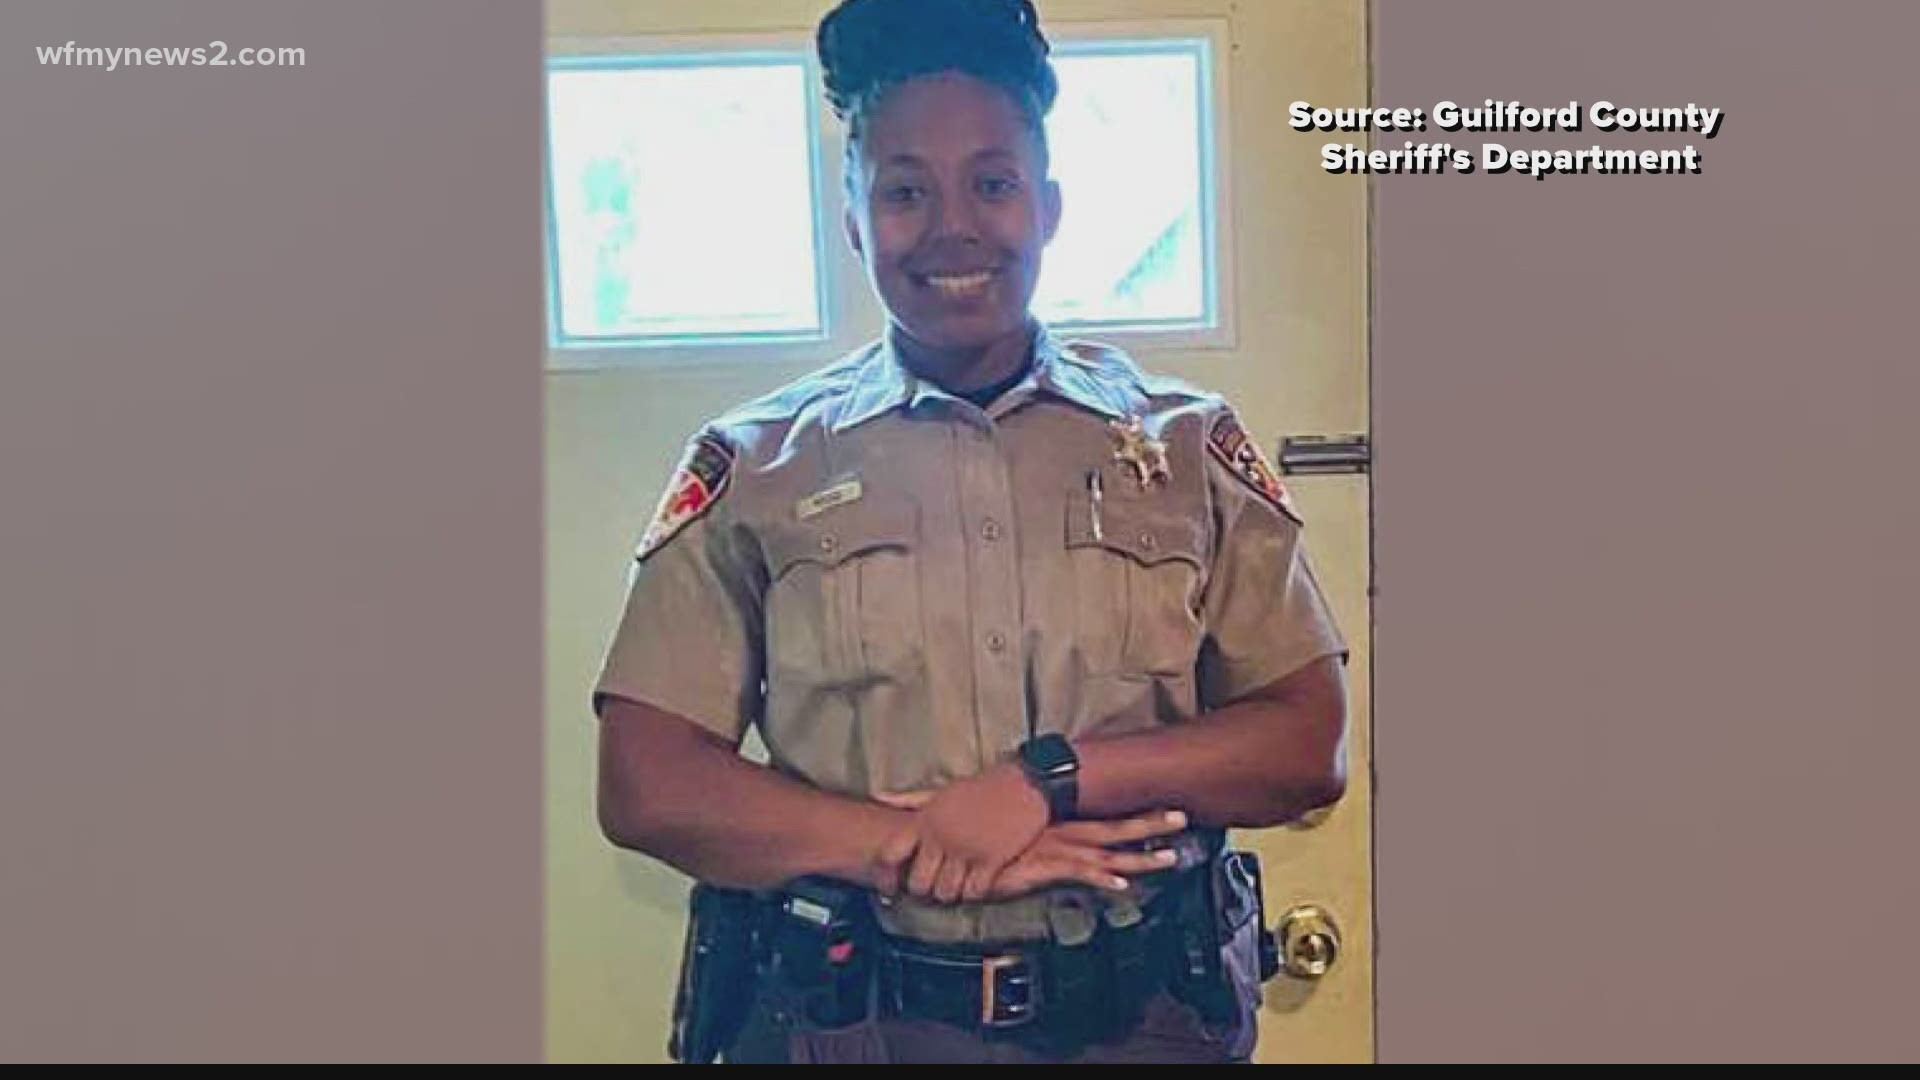 LaKiya Rouse was working as a bailiff at the Guilford County Courthouse in Greensboro. She died shortly after testing positive for coronavirus.